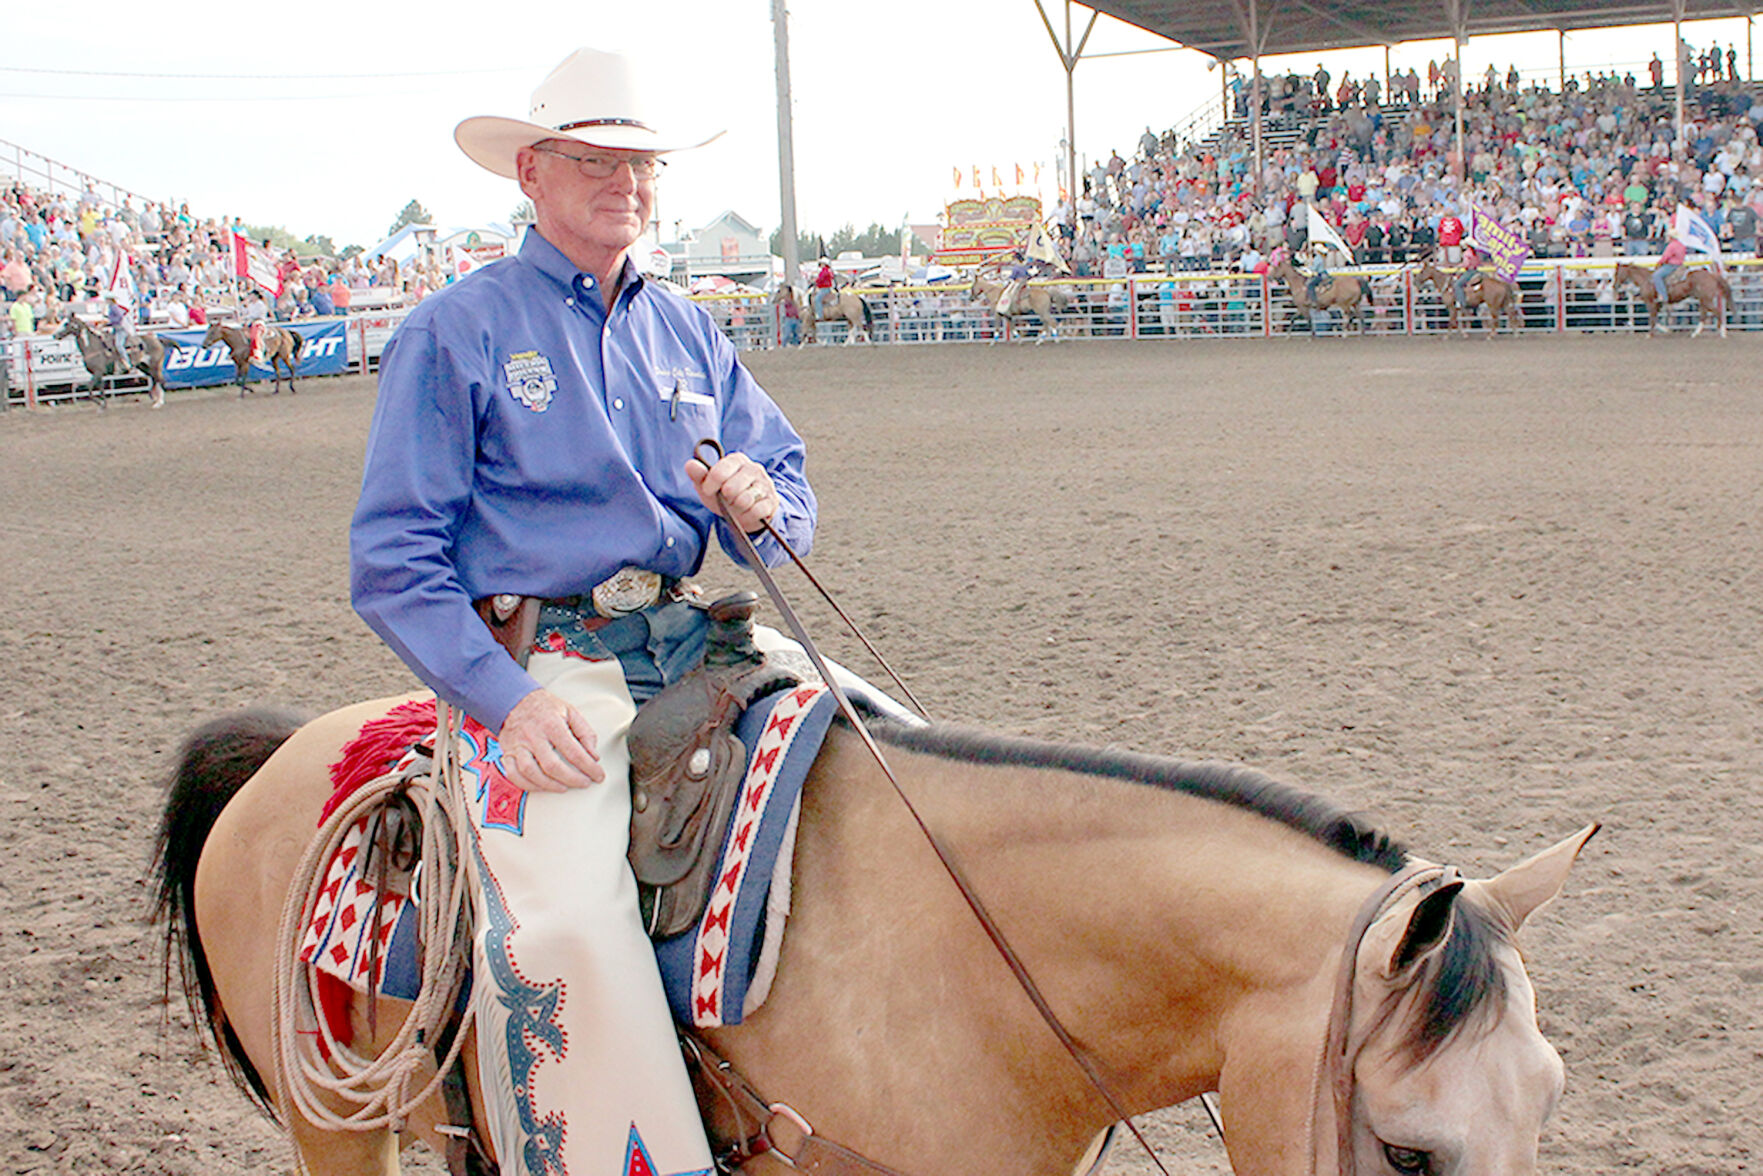 Dr. R.C. Trotter has announced his retirement as president and volunteer at the Roundup Rodeo, Dodge City, Kansas, after 20 years of service. (Photo courtesy of Ted Harbin.)